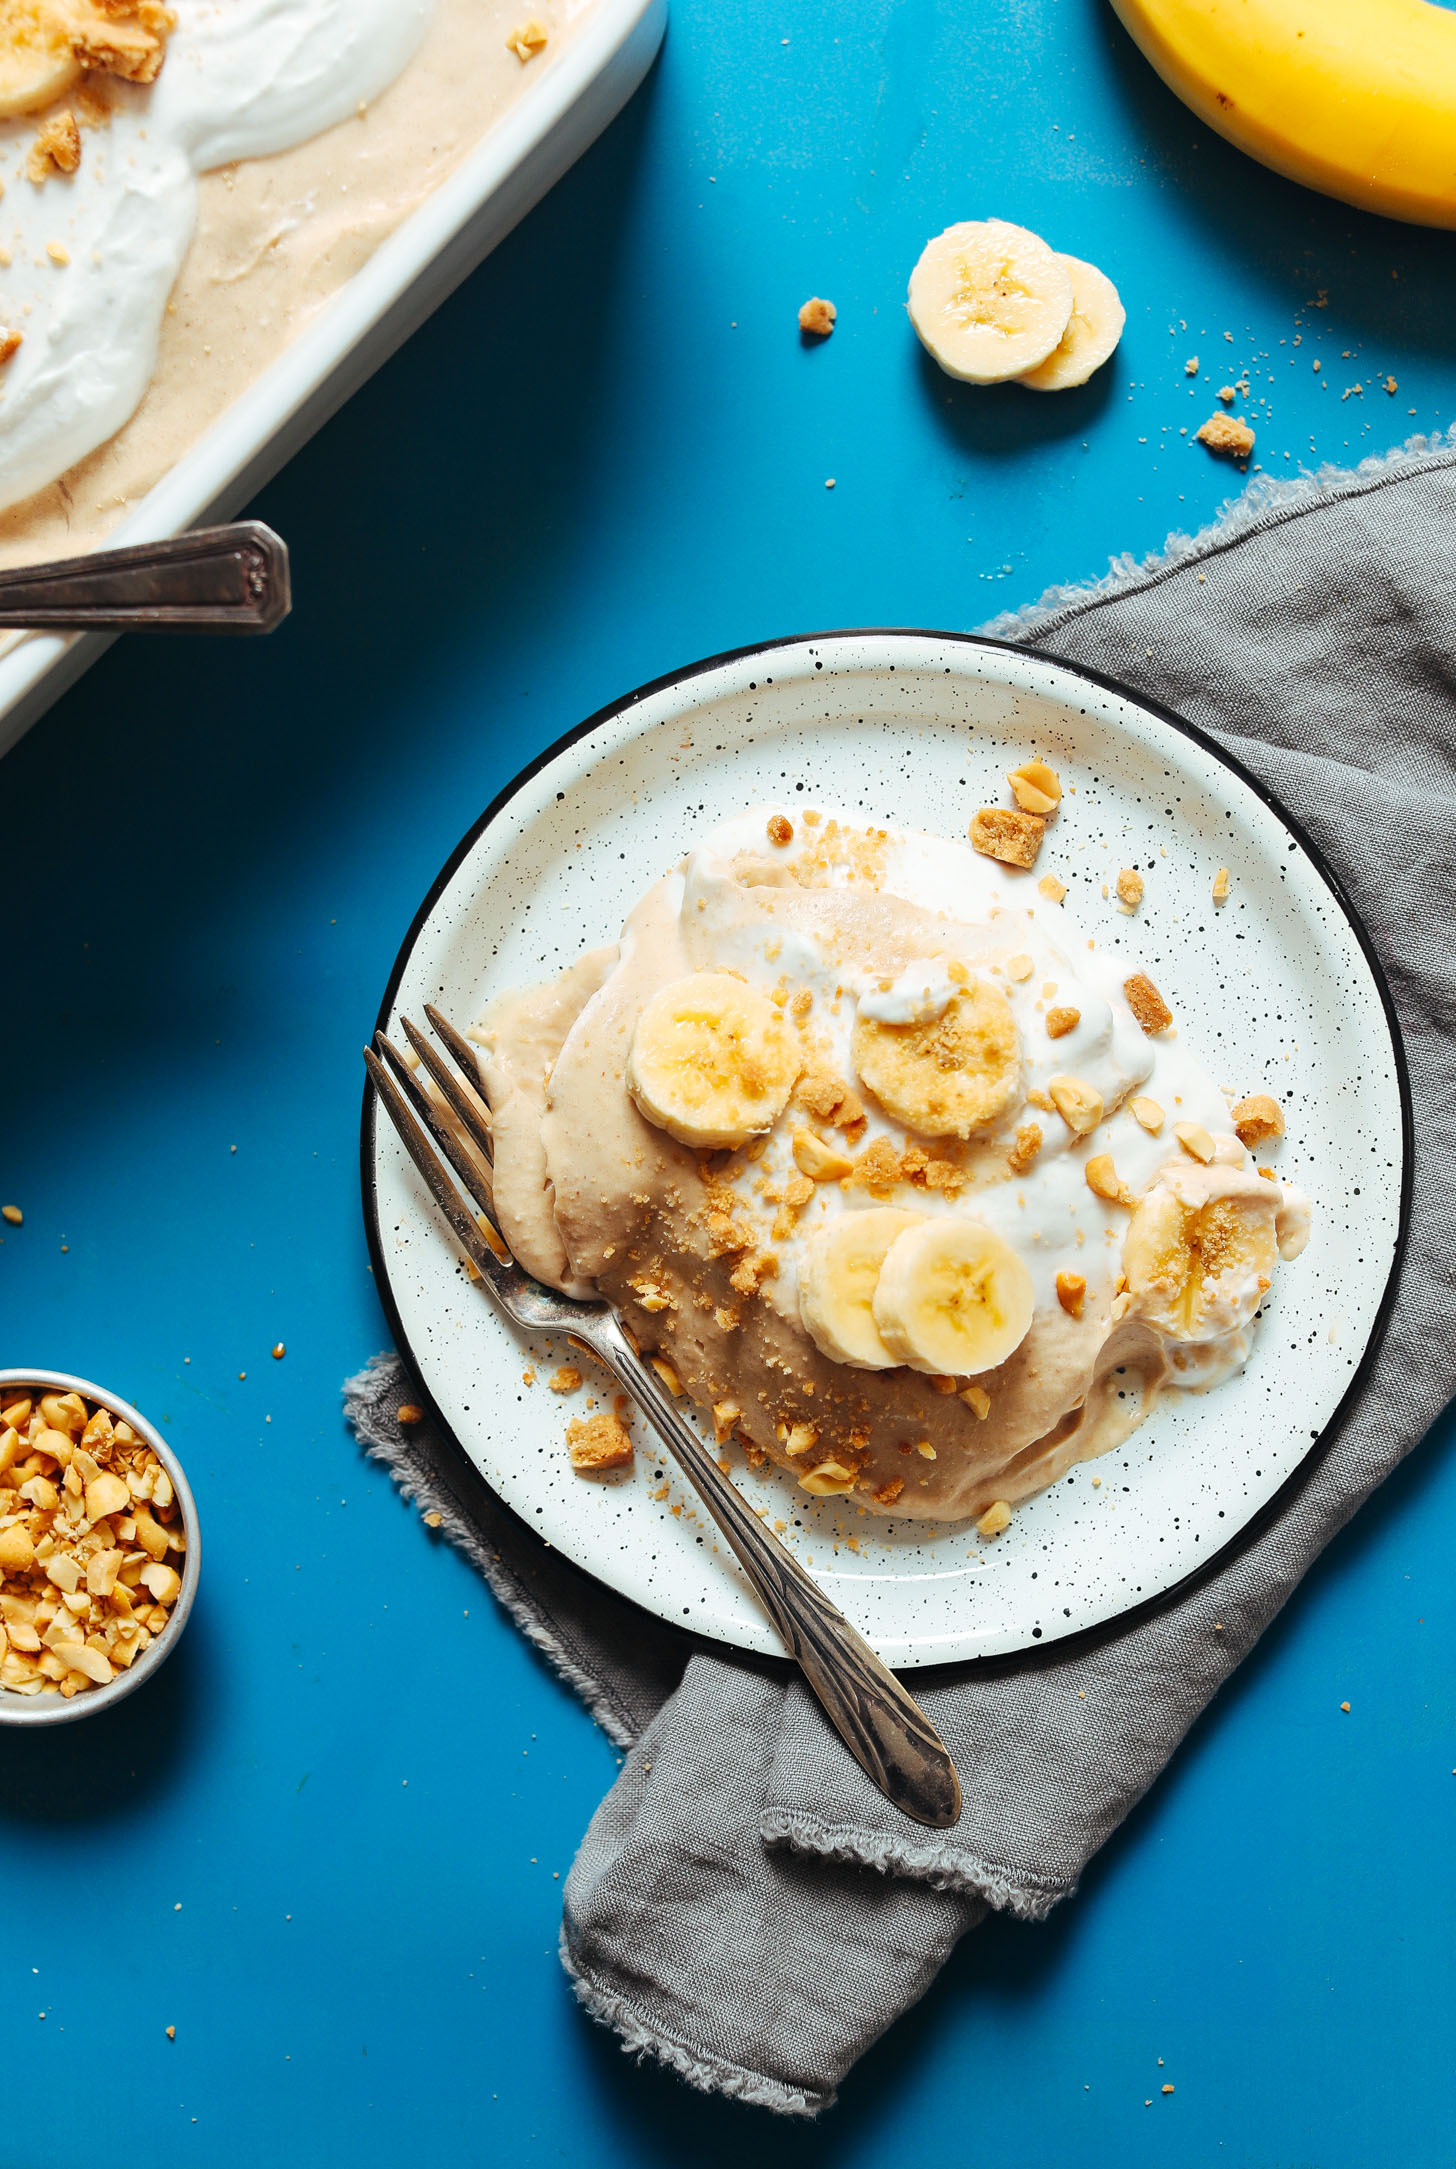 Dessert plate filled with a serving of our delicious No Bake Peanut Butter Banana Pudding